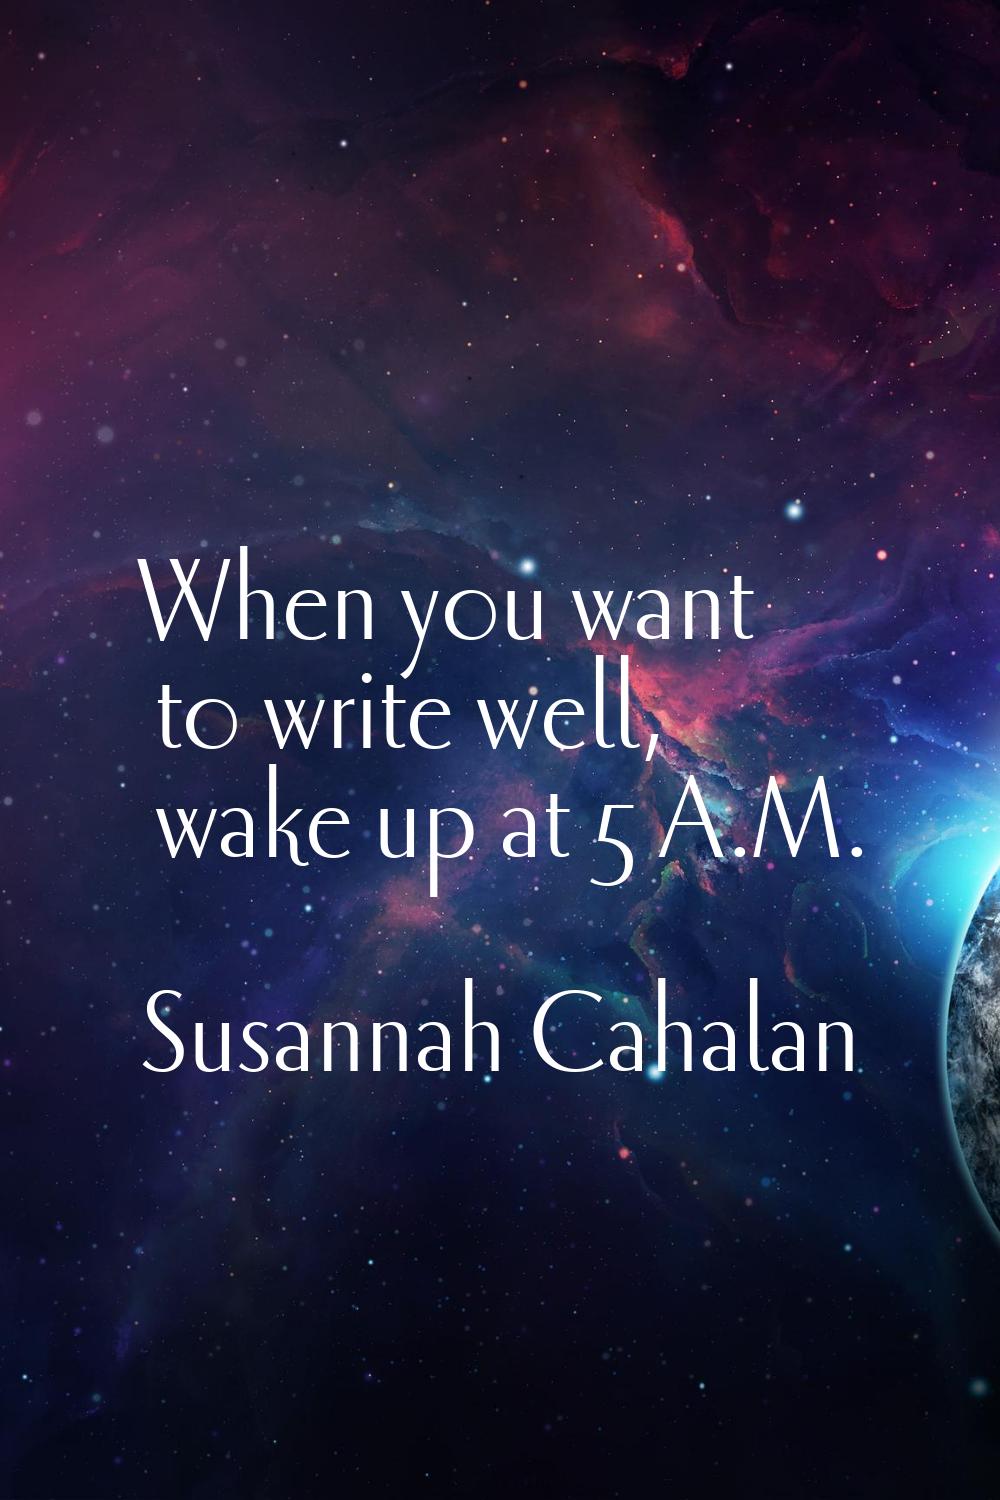 When you want to write well, wake up at 5 A.M.